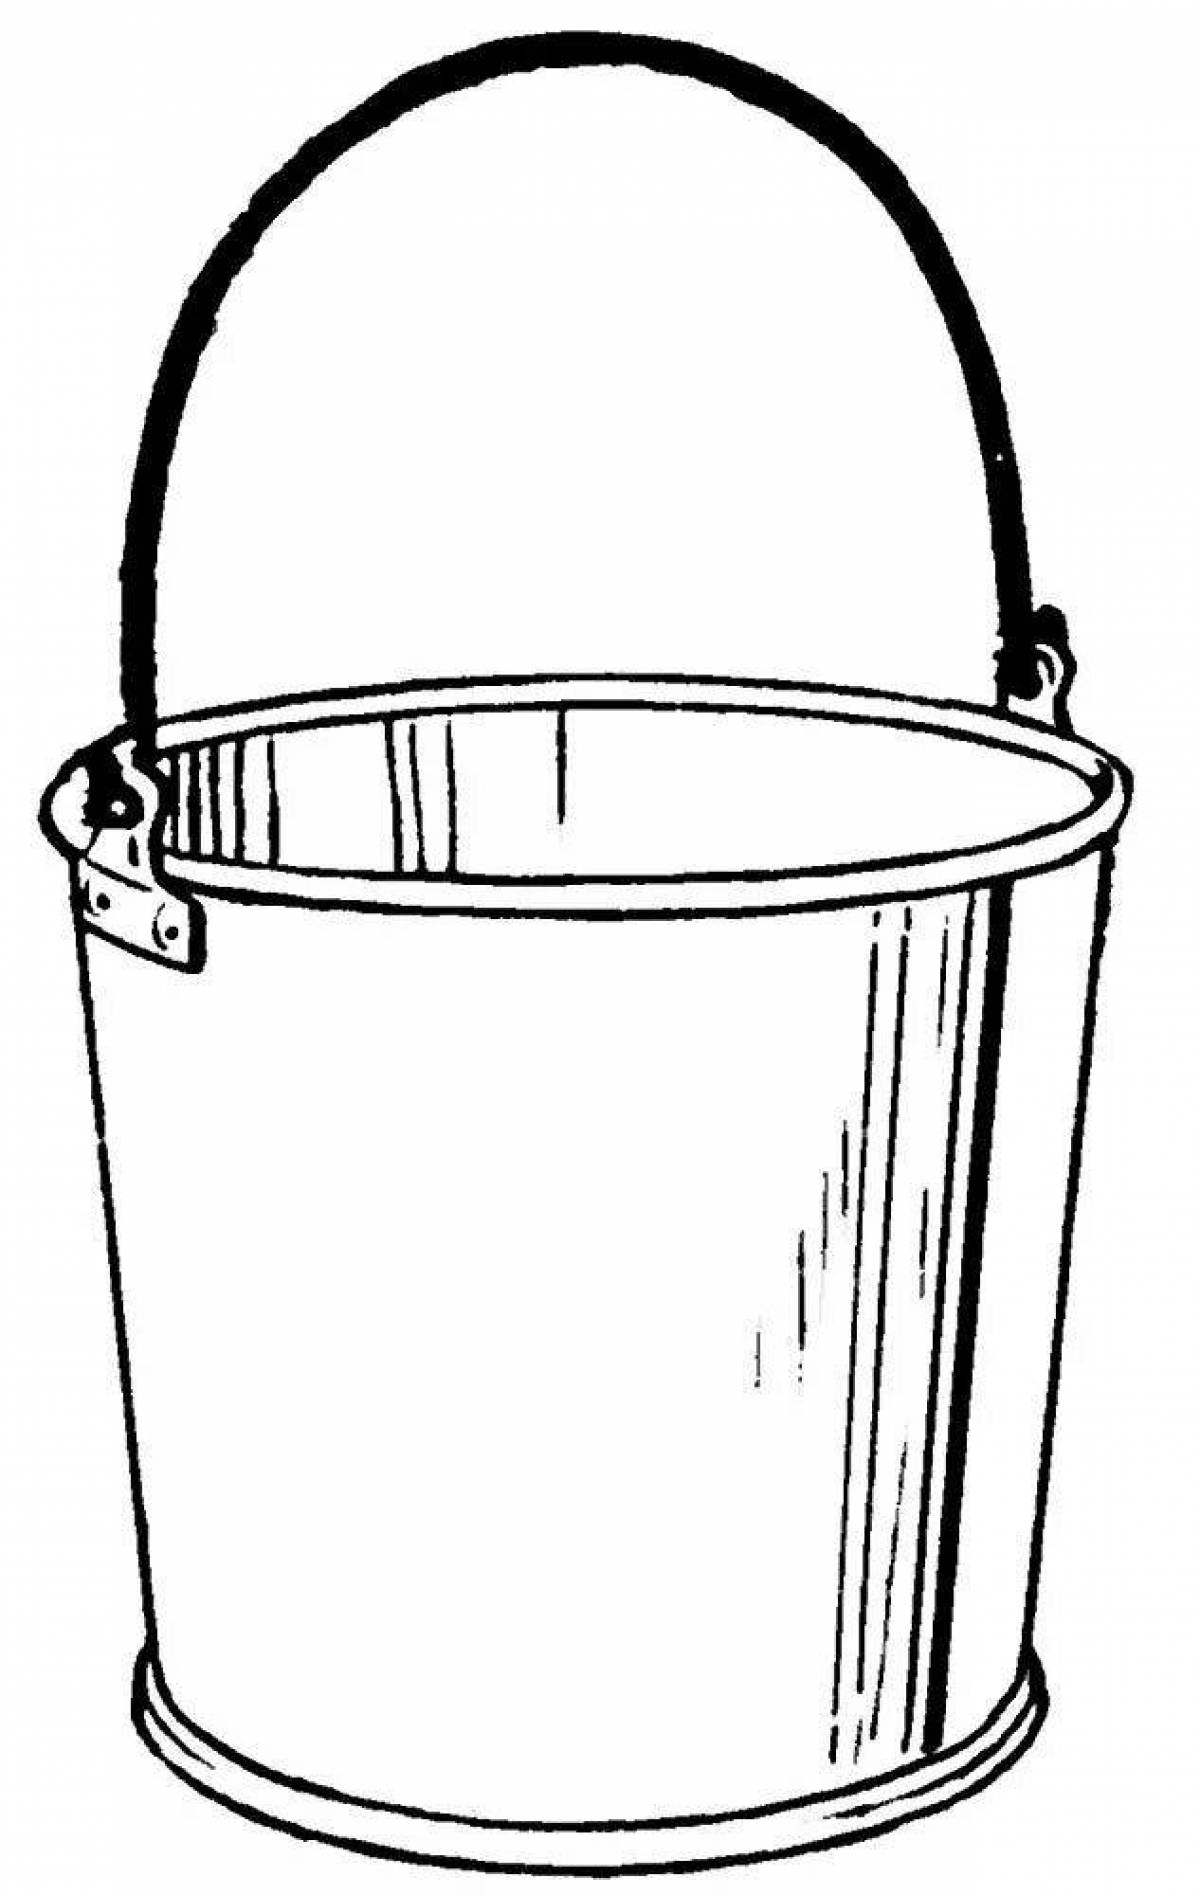 Fun bucket coloring page for kids